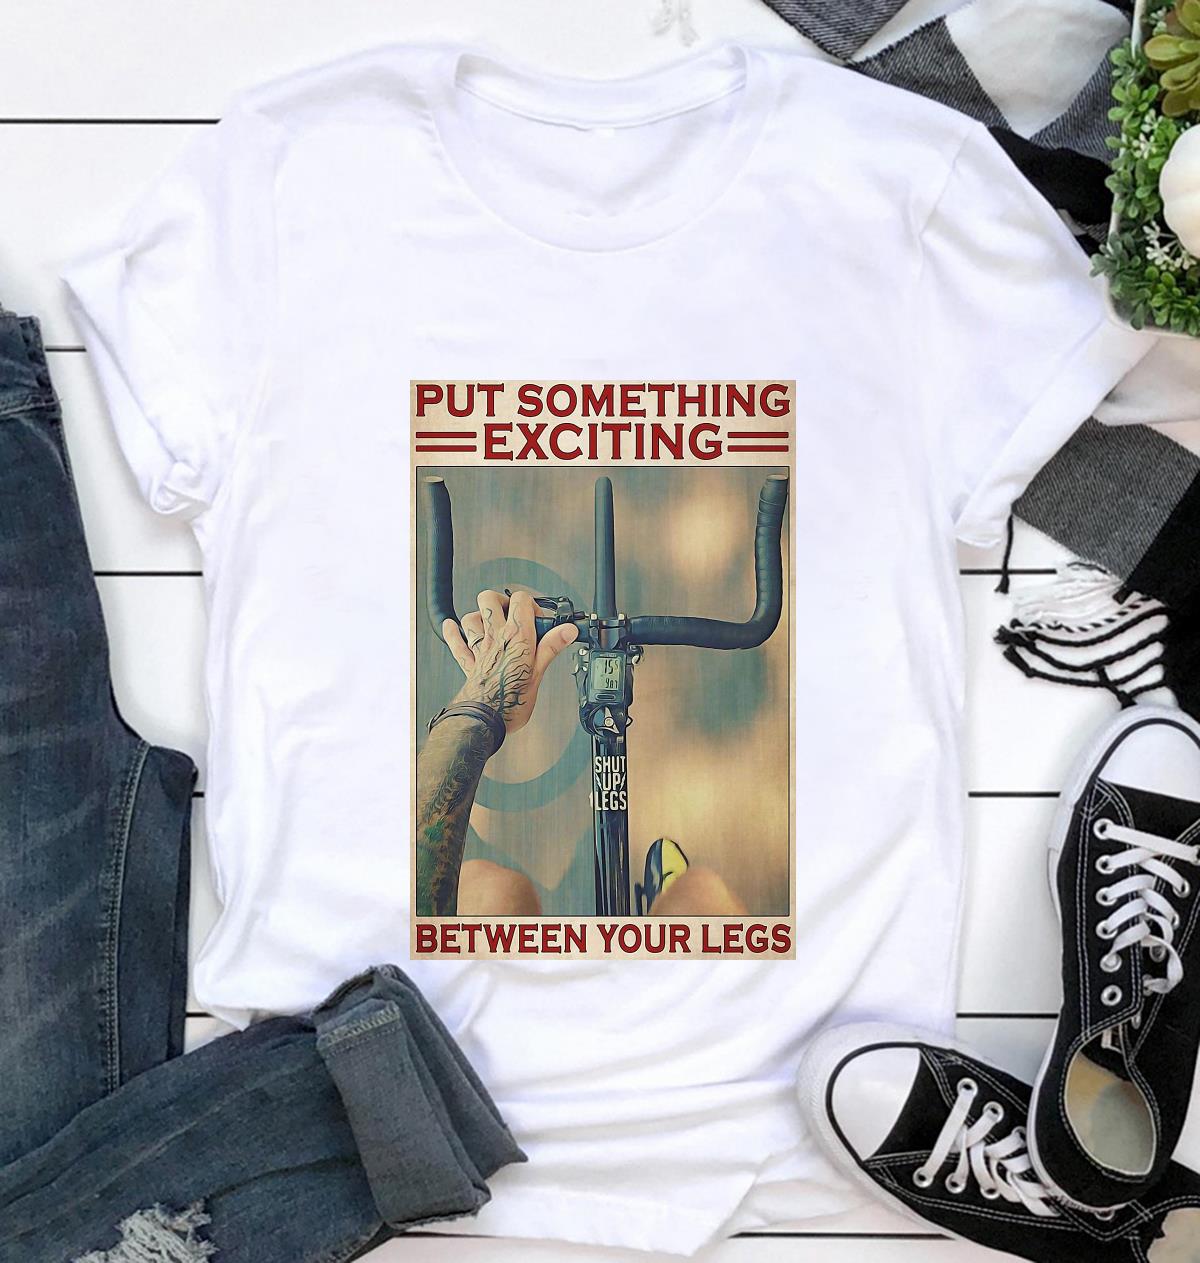 Cycling put something exciting between your legs poster canvas